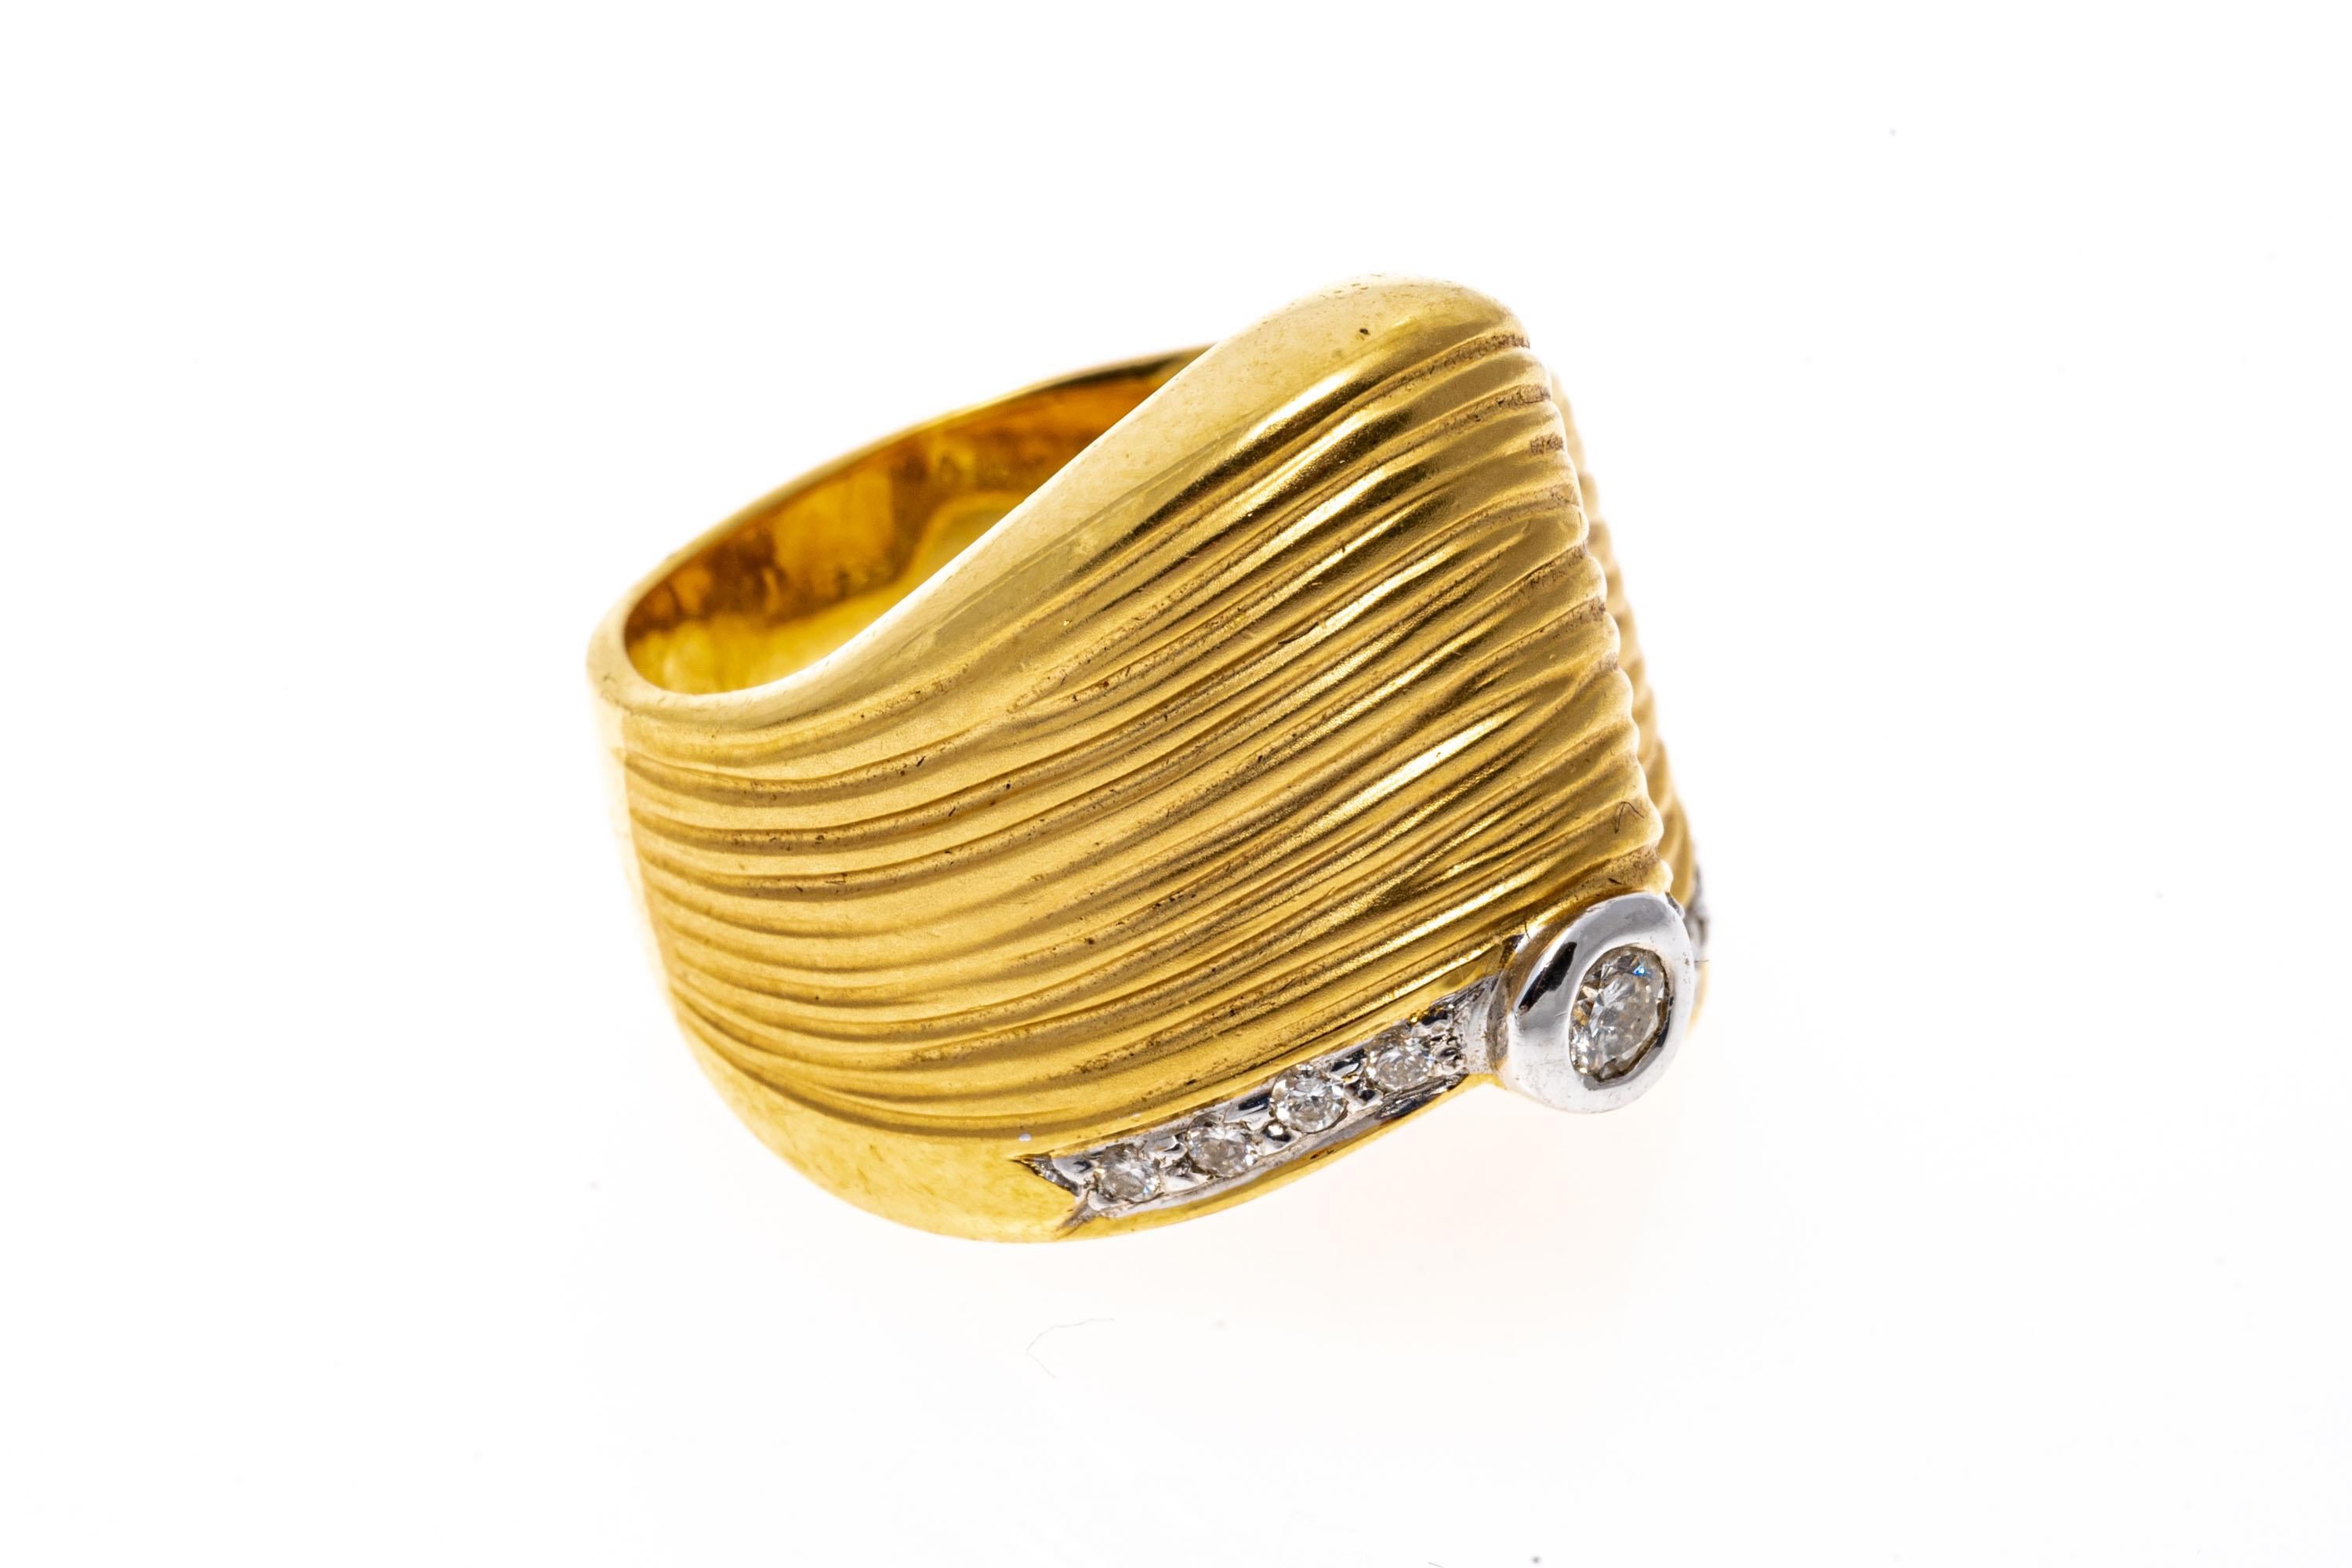 18k yellow gold ring. This yellow gold, free-form, contemporary wave ring has an ultra-wide, matte-finished and grooved body, offset on one end with a high polished edge, set with round faceted diamonds, approximately 0.10 TCW, and finished with a